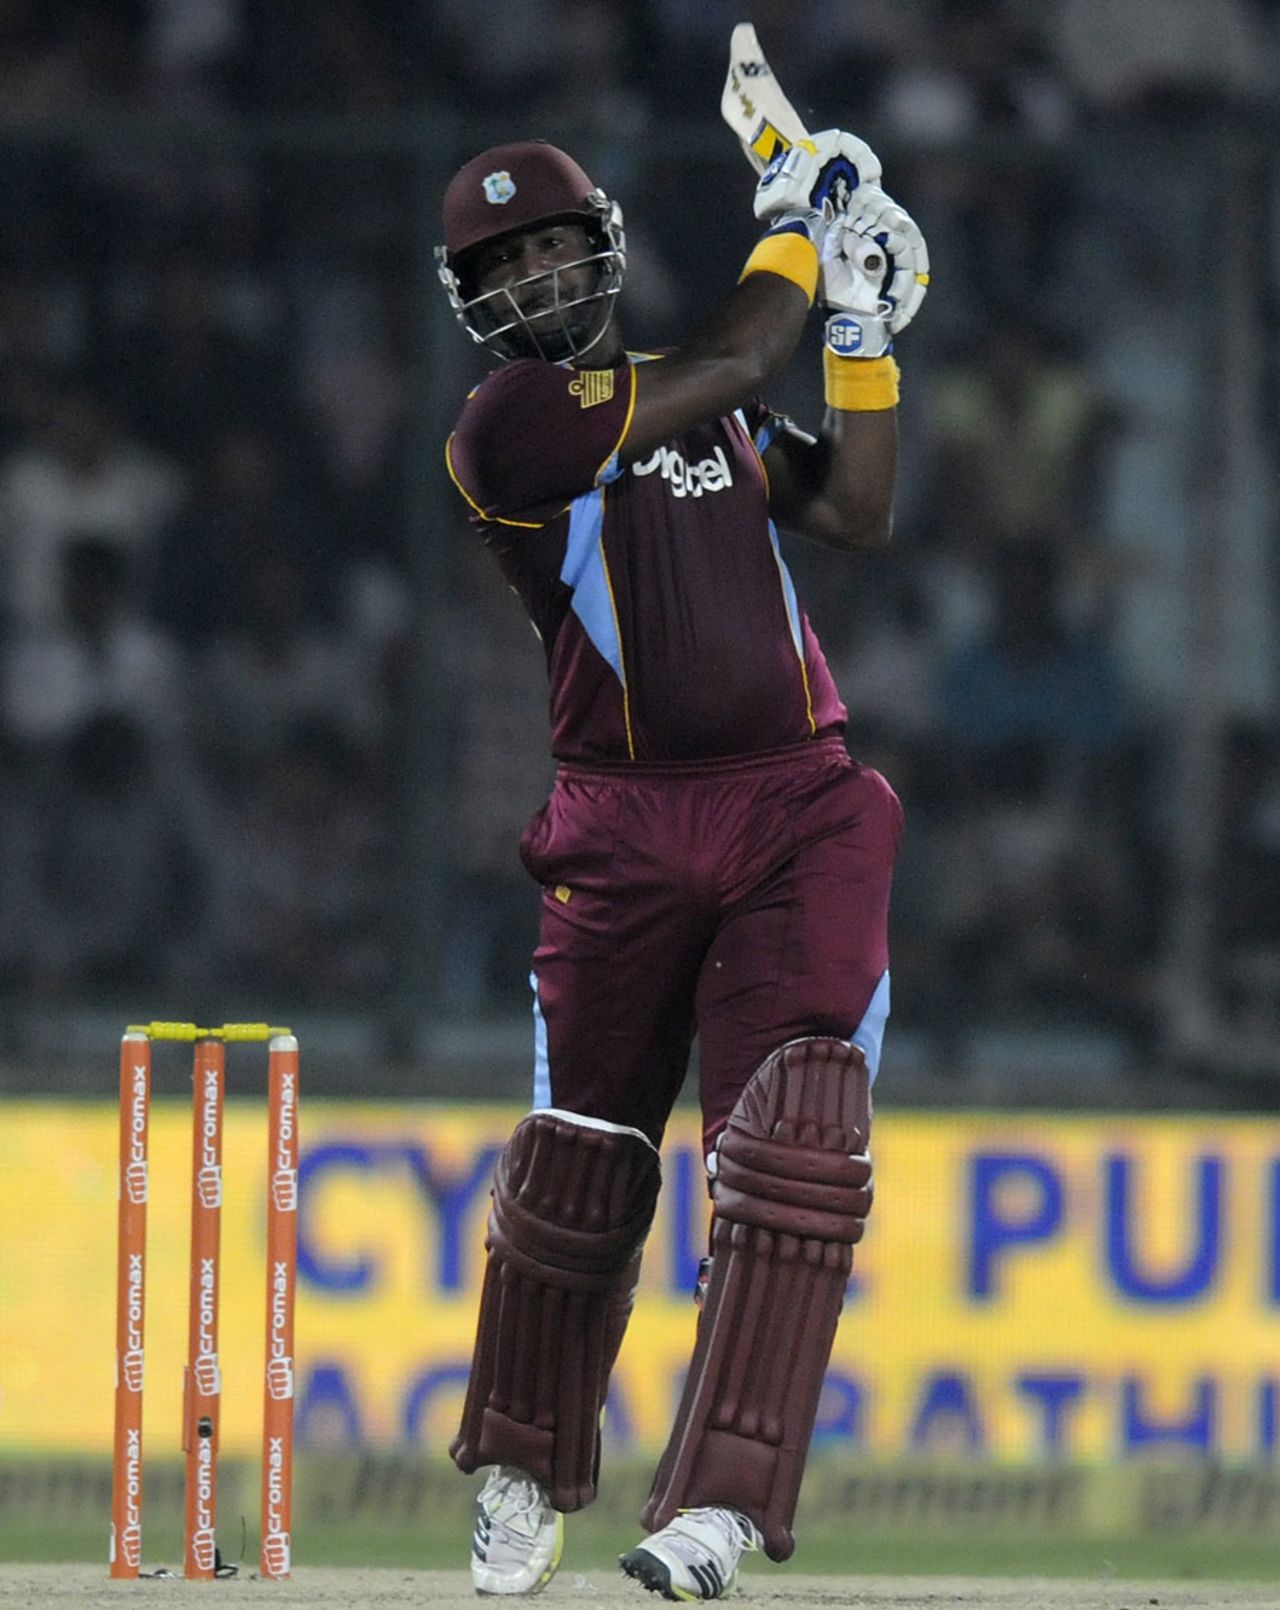 Dwayne Smith launched two sixes, India v West Indies, 2nd ODI, Delhi, October 11, 2014